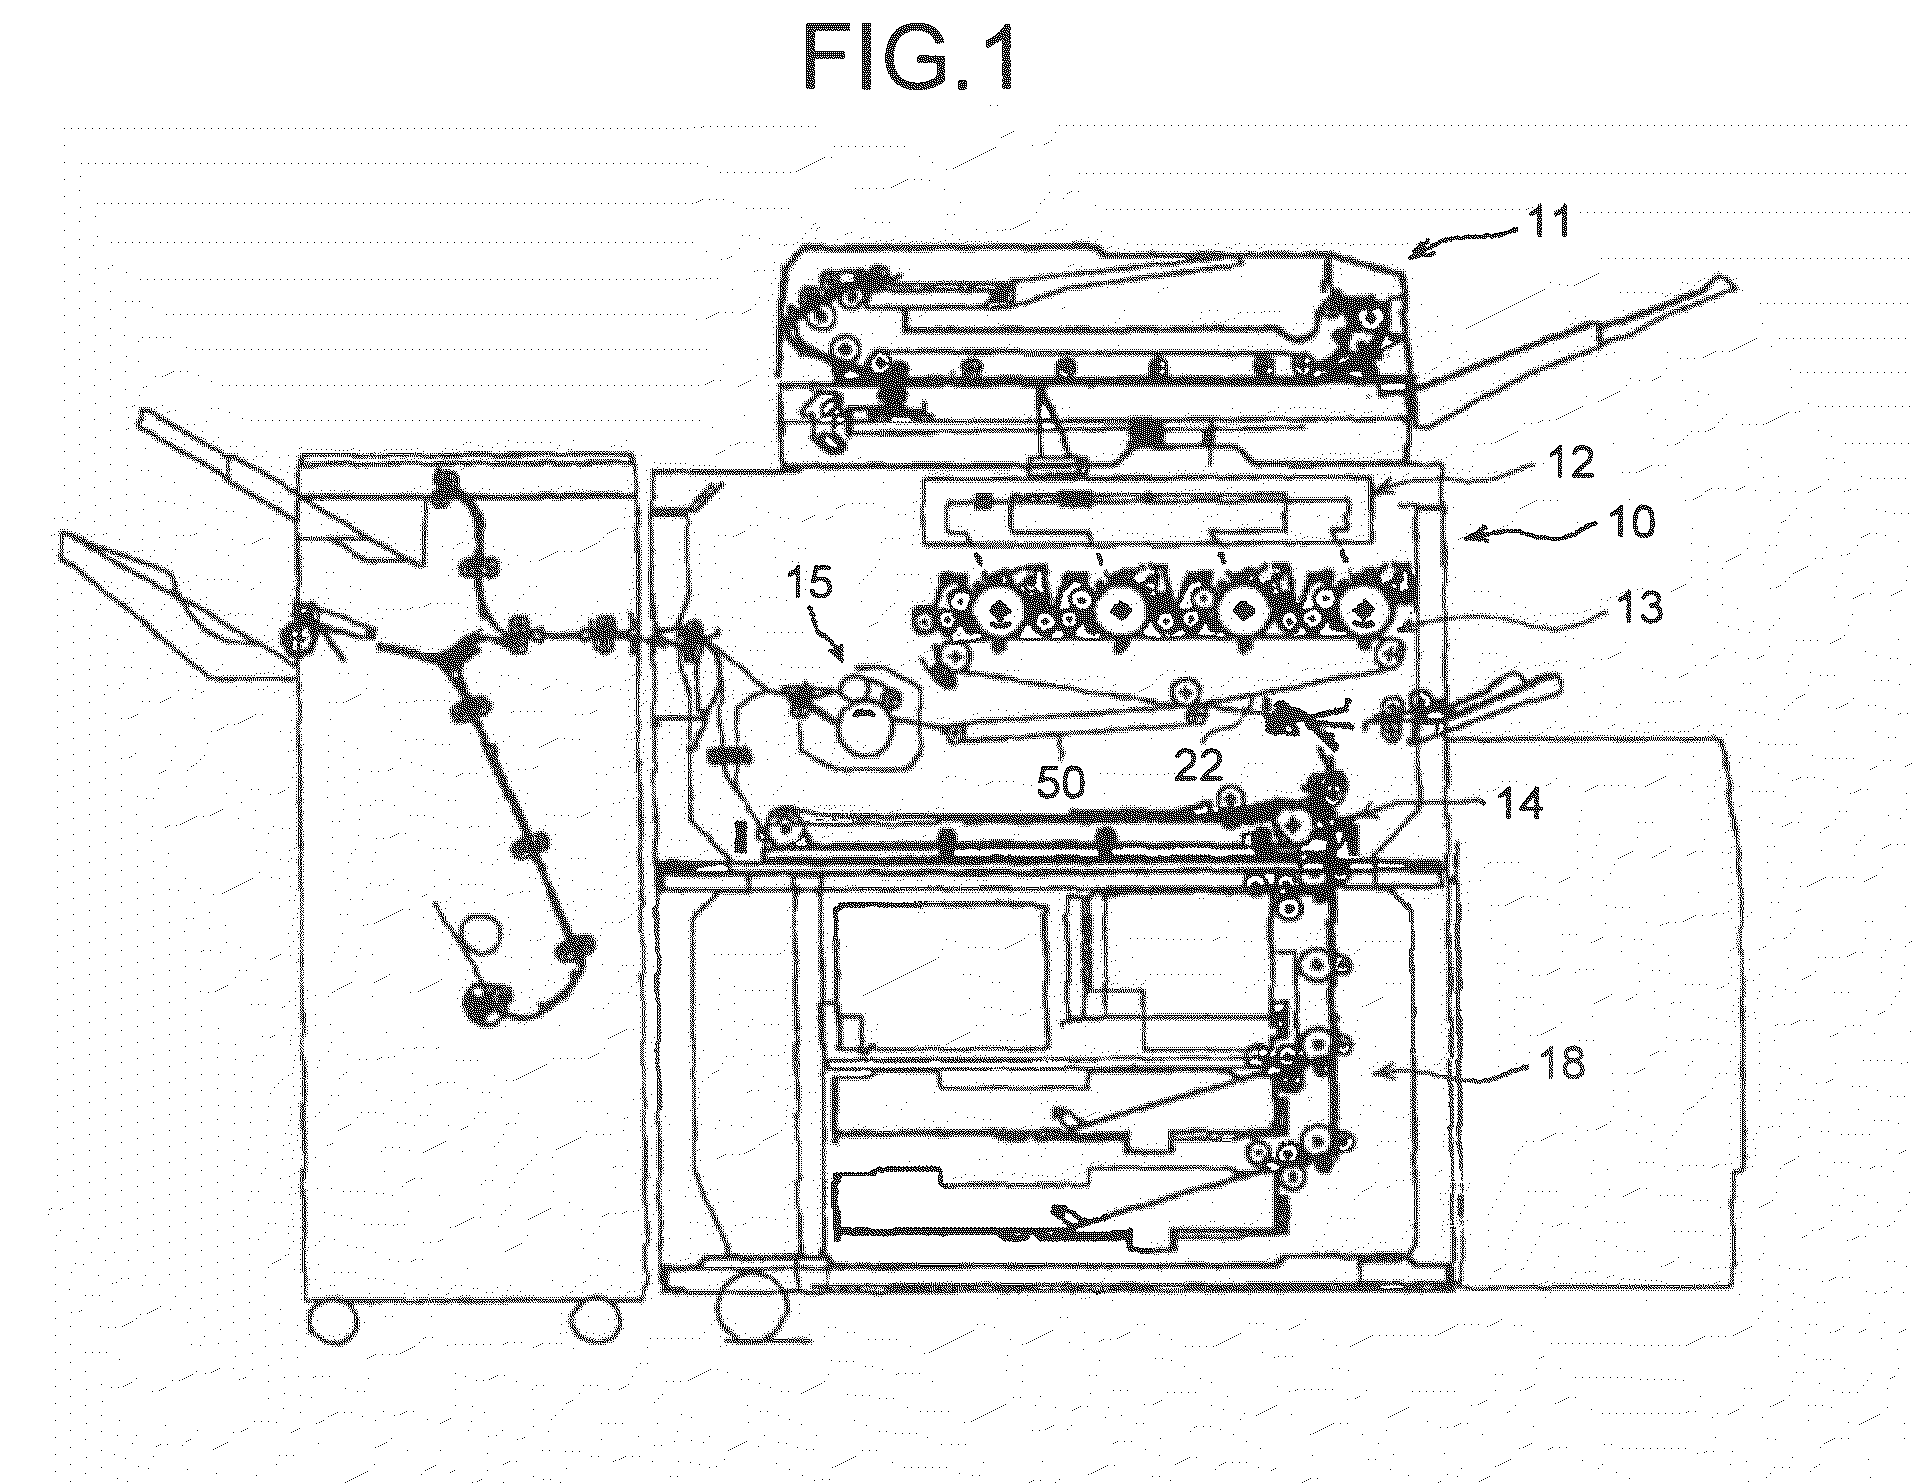 Image forming apparatus, image forming method, and computer program product for causing a computer to execute the method